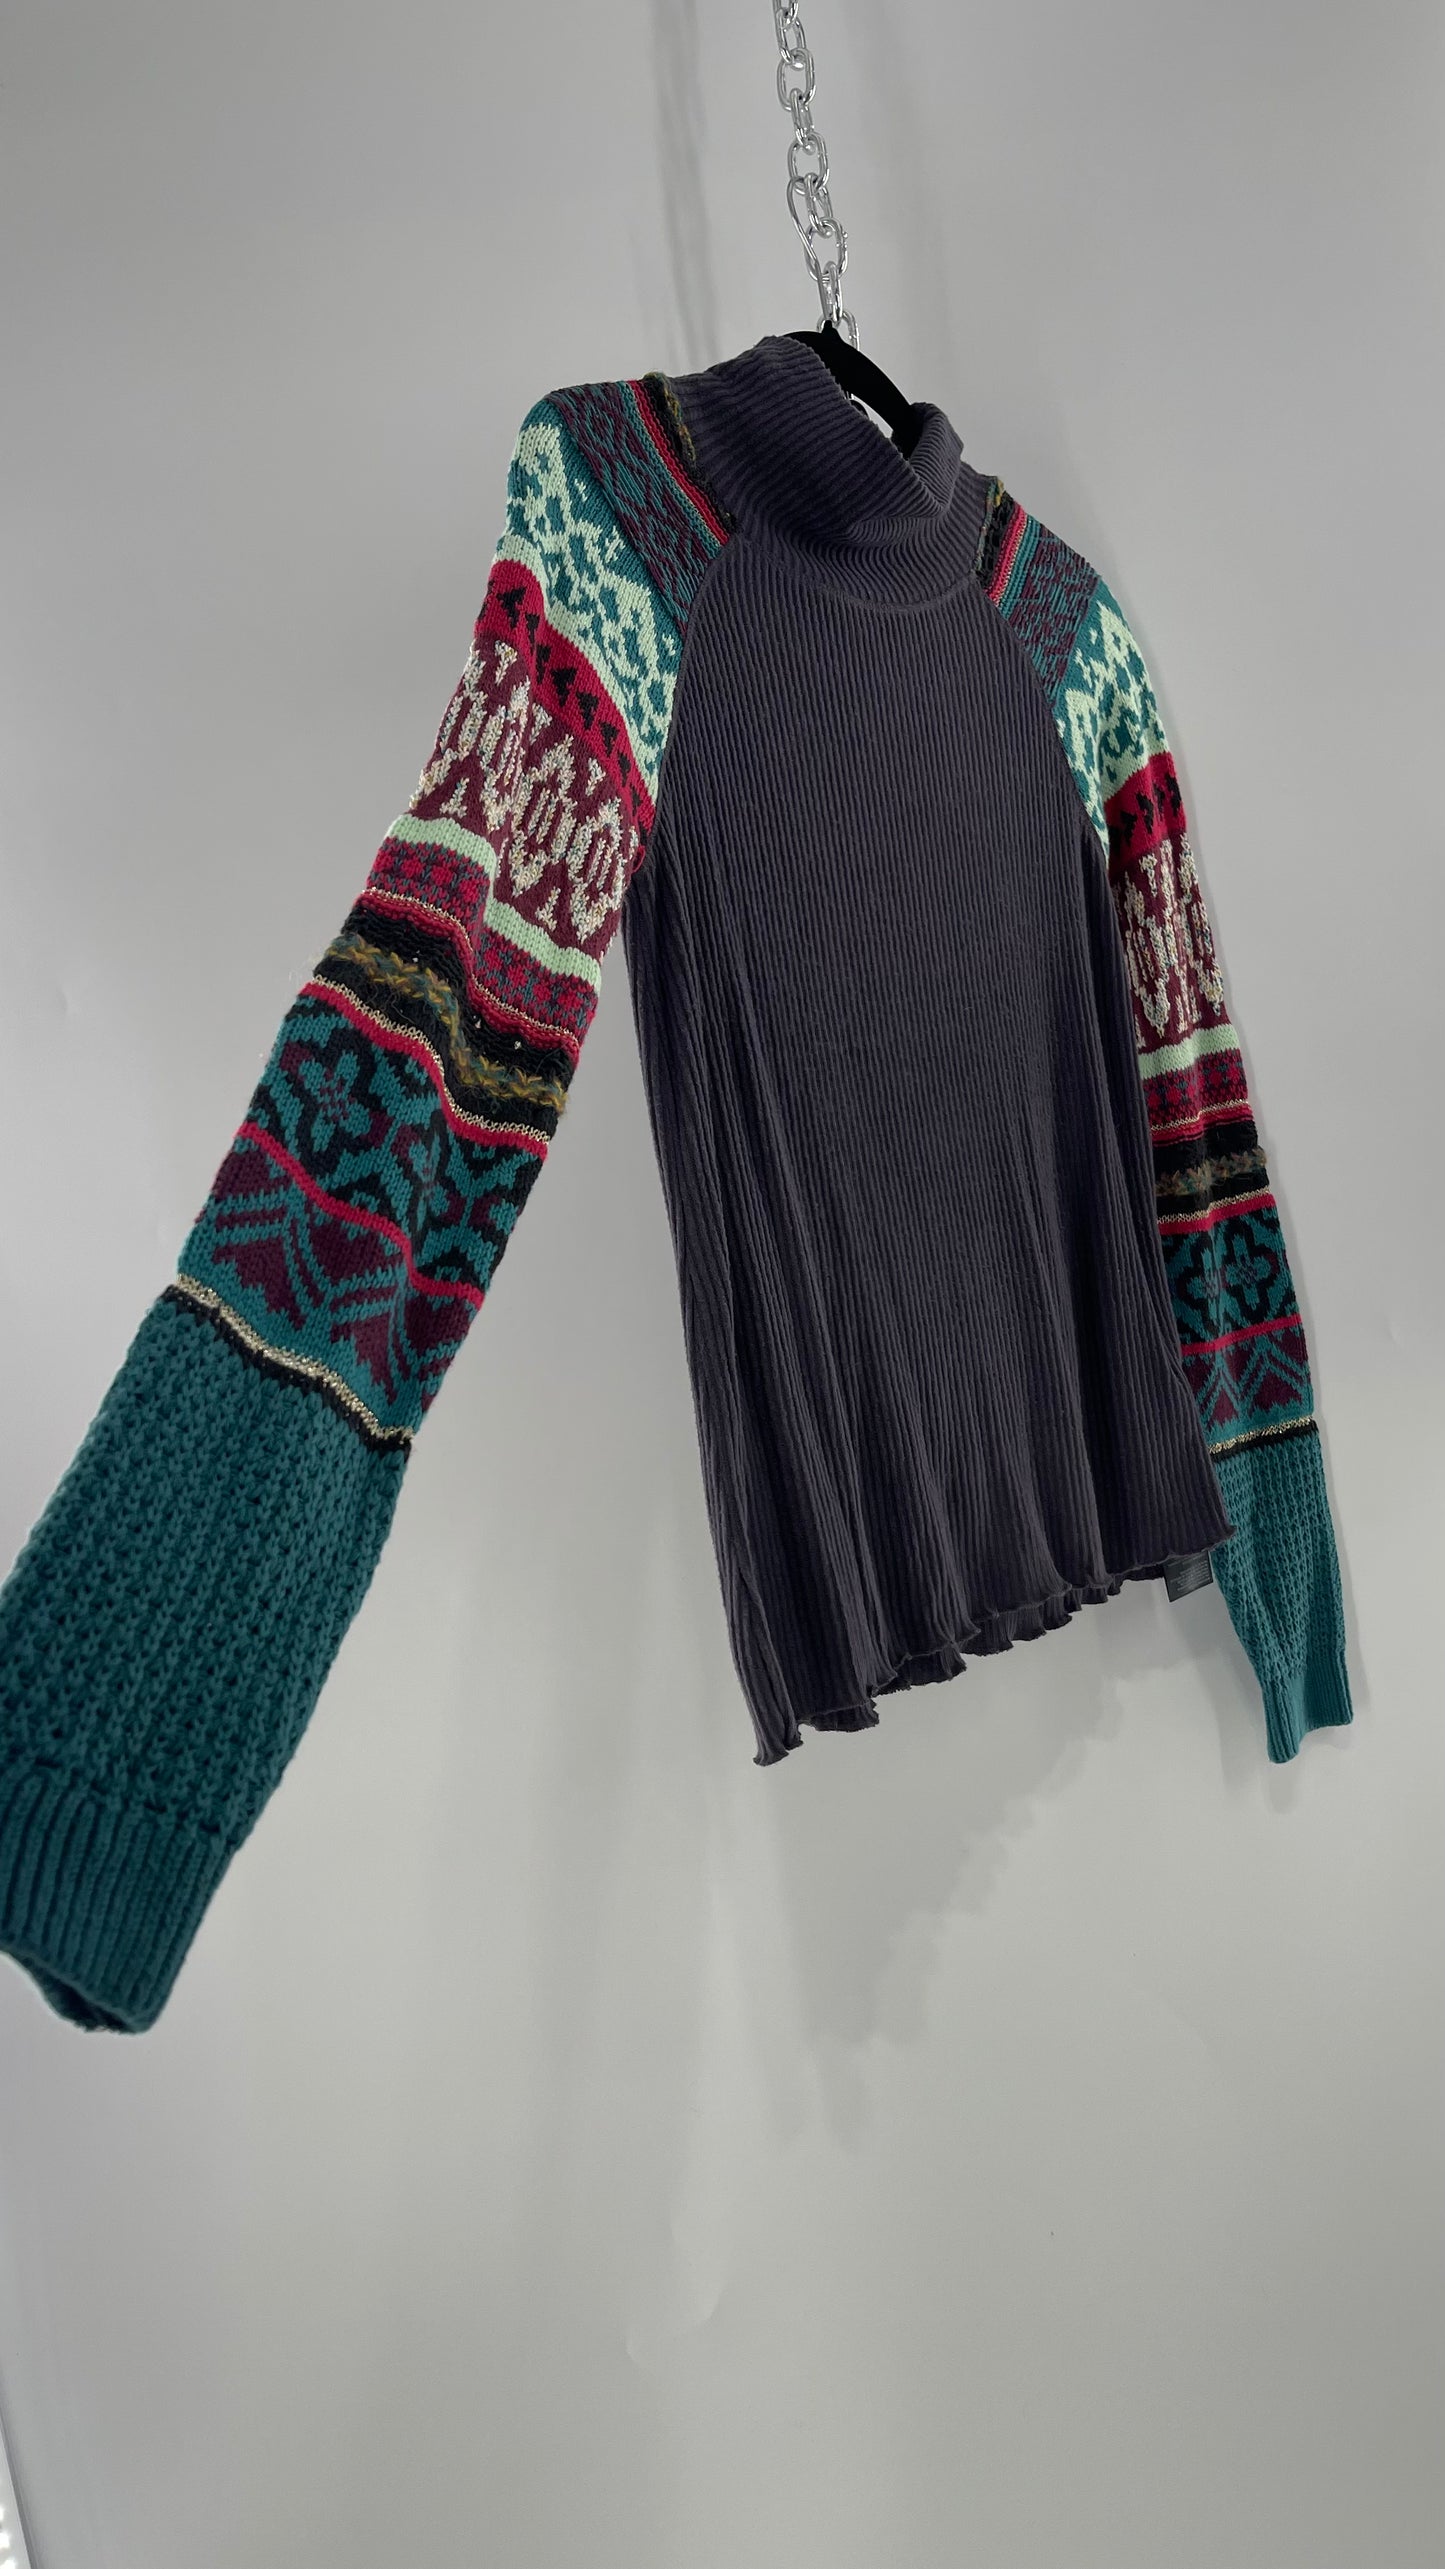 Free People Grey Cozy Knit with Colorful Patterned Knit Sleeves (Small)